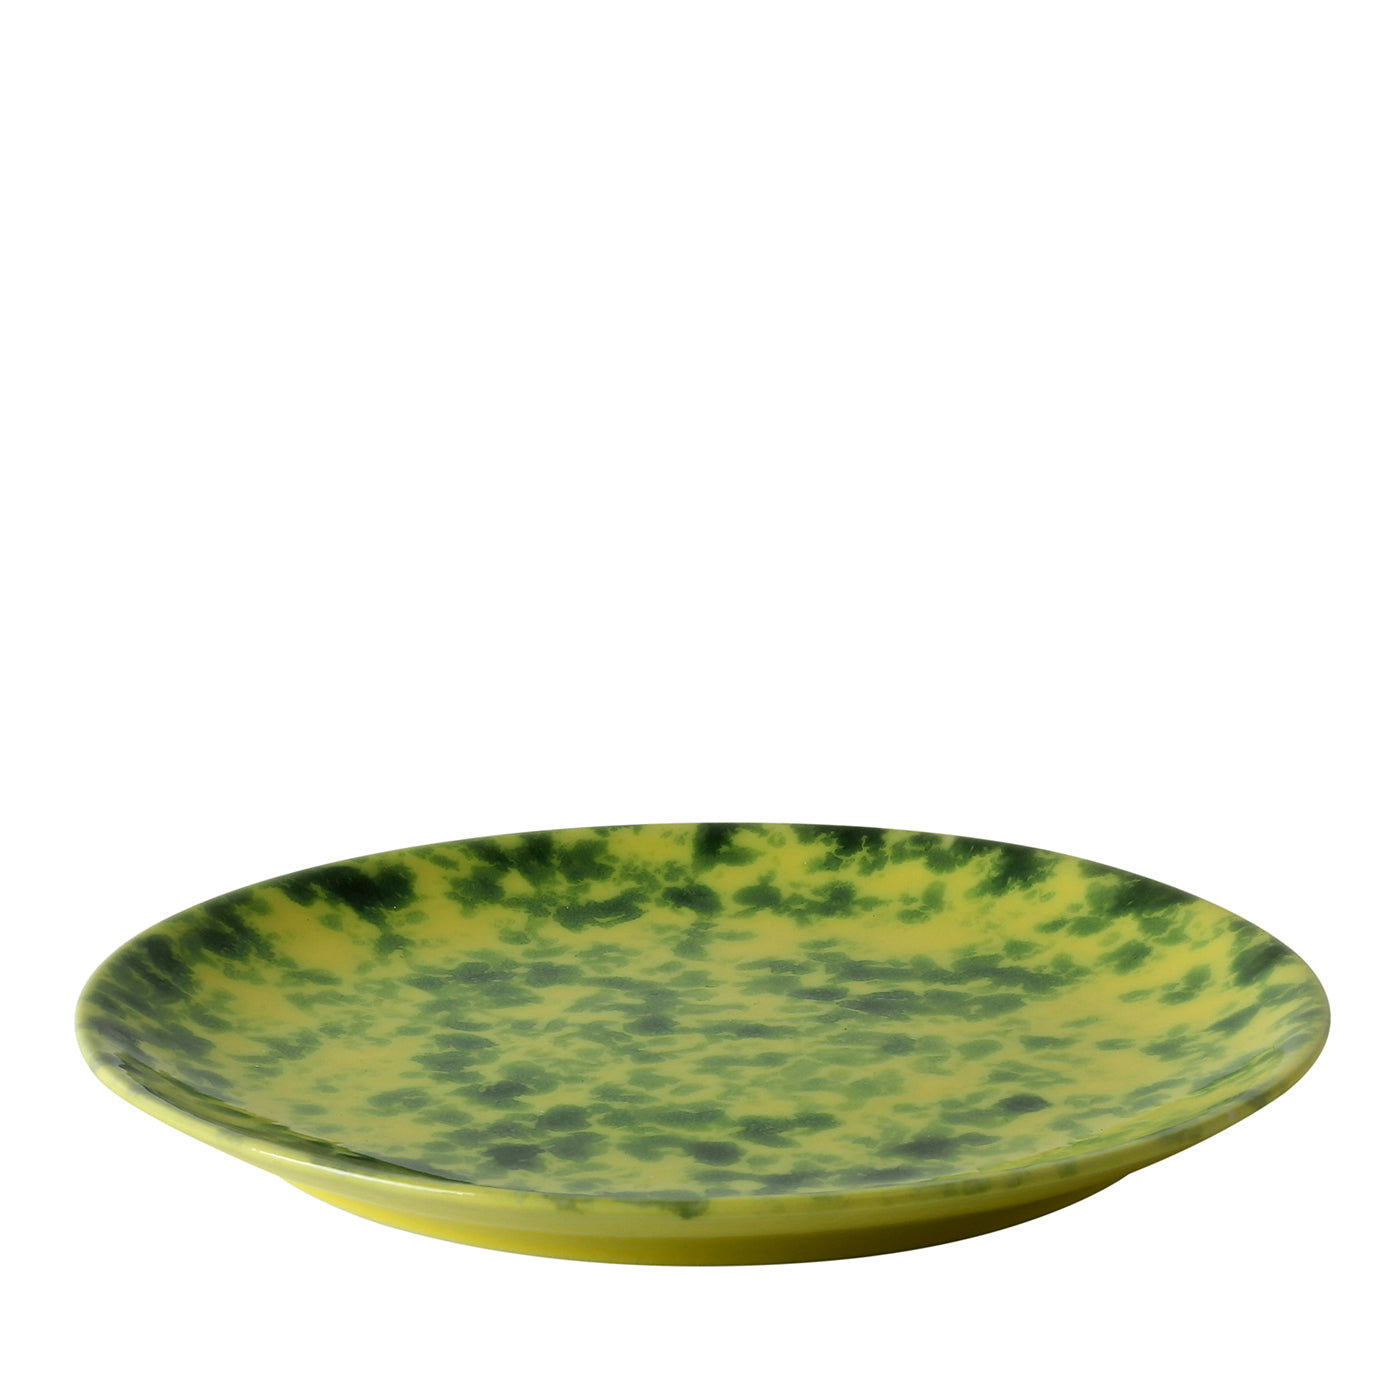 Limoni Round Green-Mottled Yellow Soup Plate - Alternative view 1